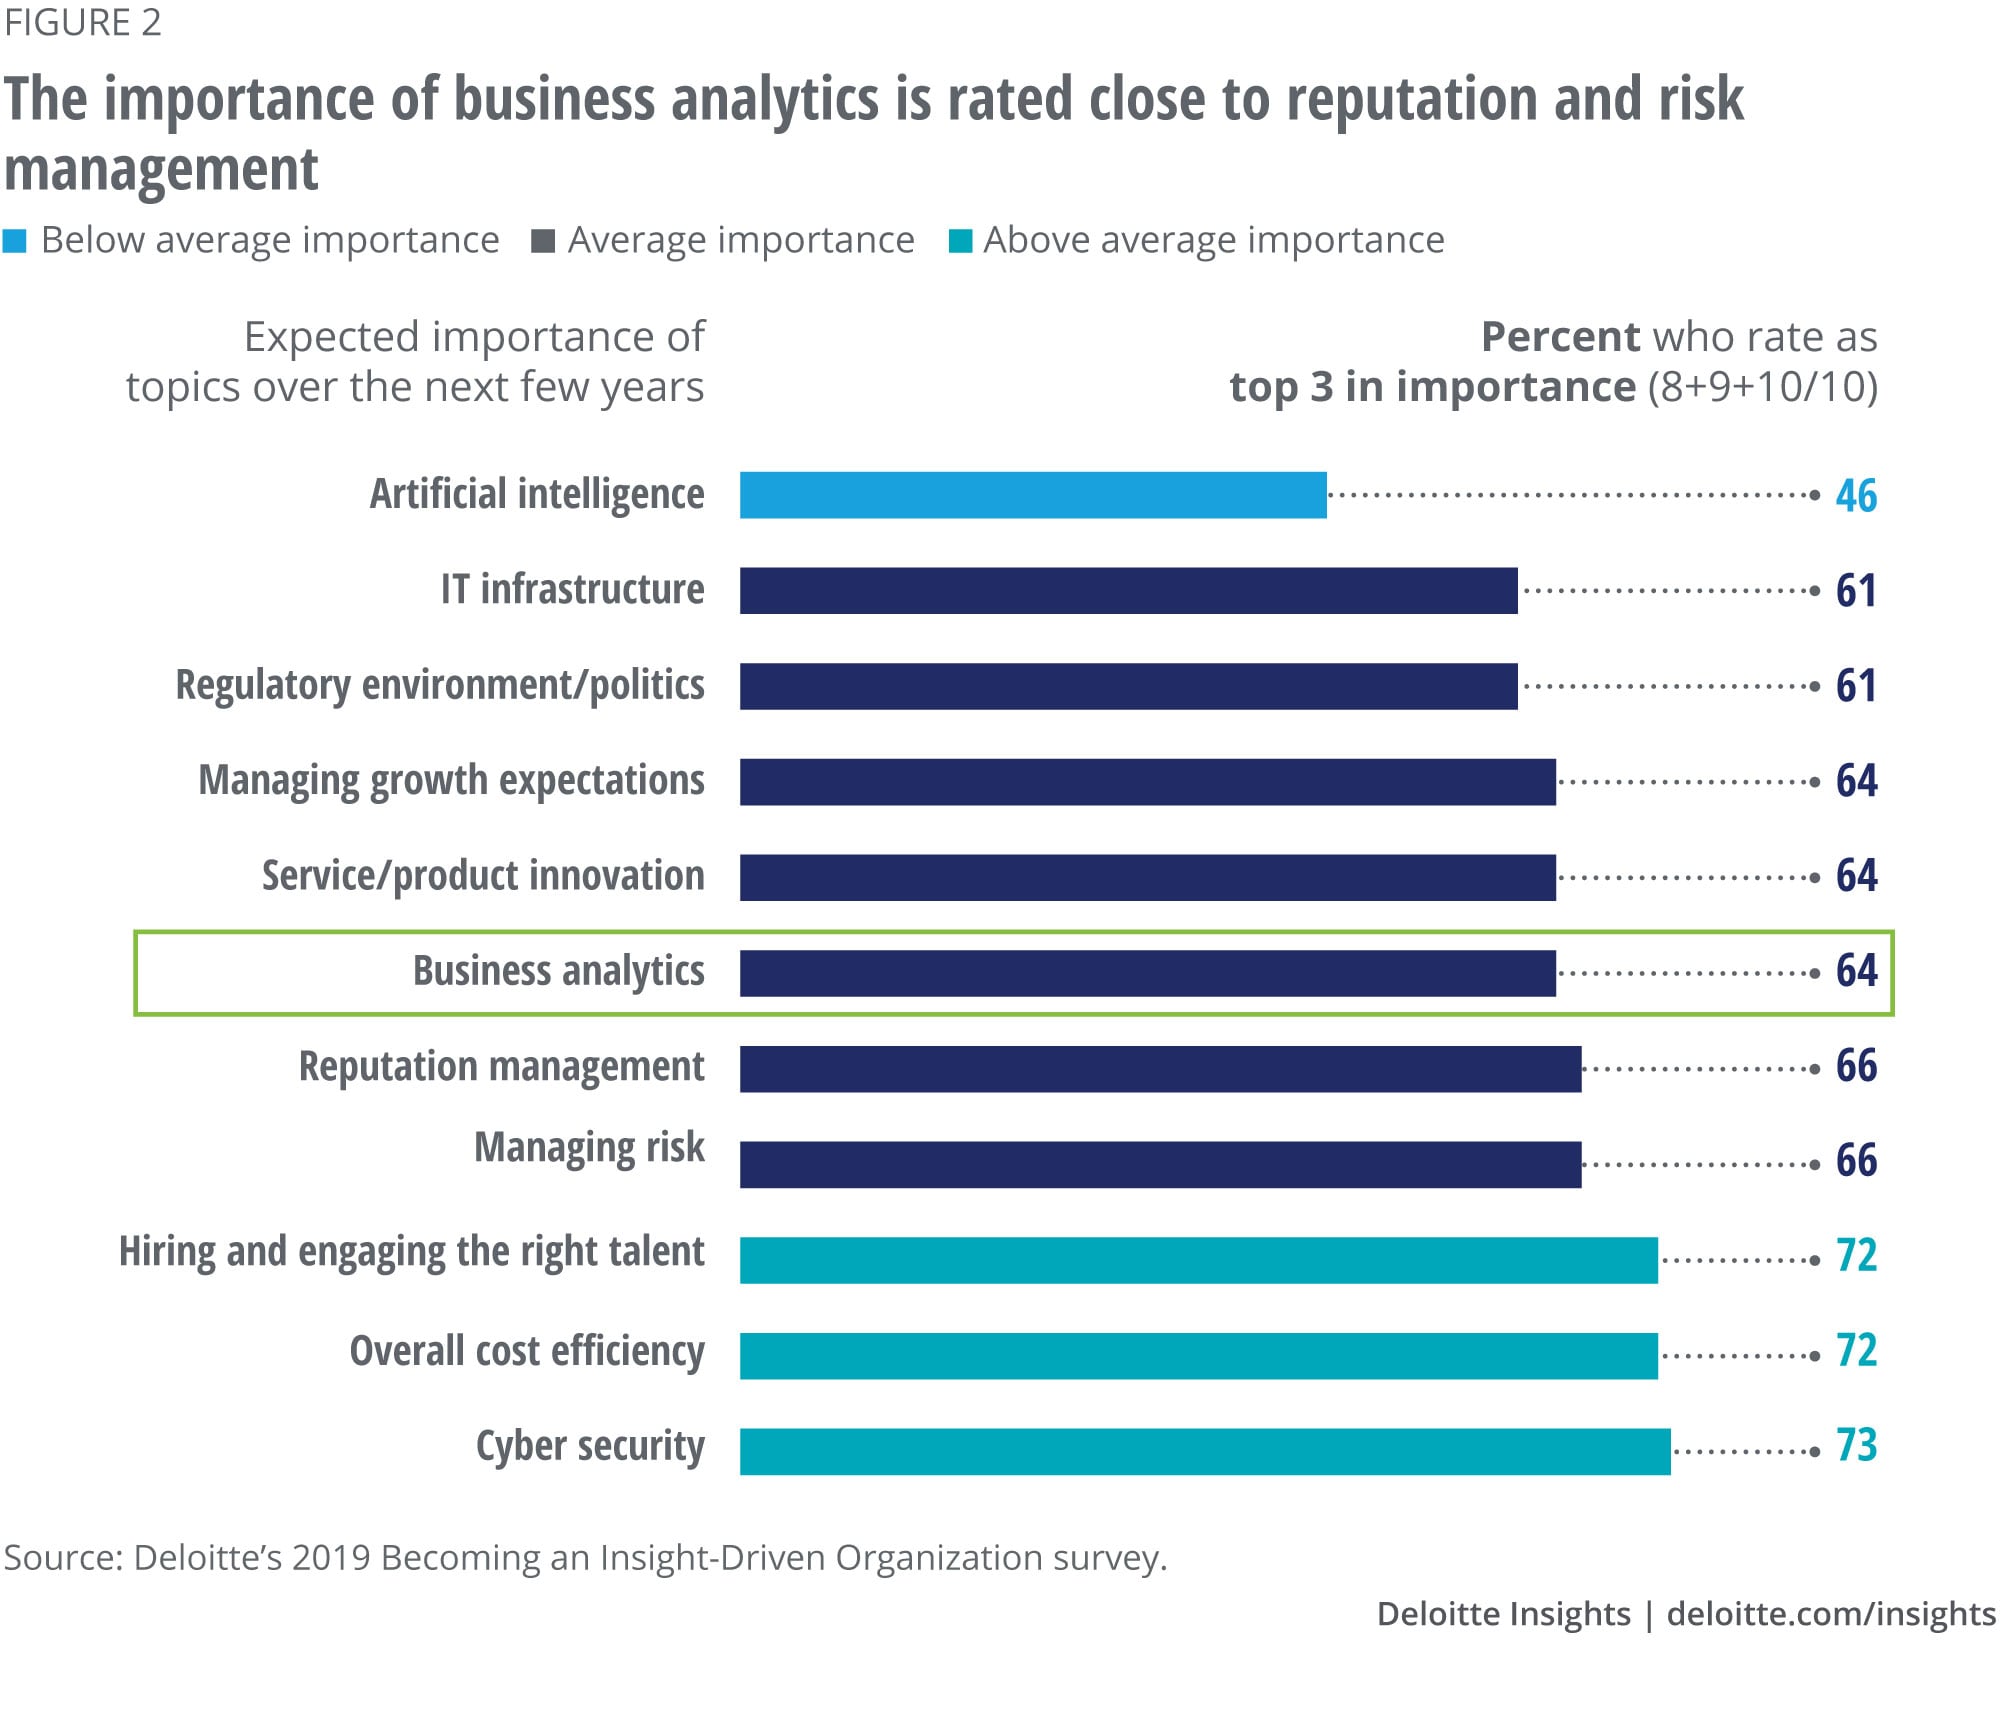 The importance of business analytics is rated close to reputation and risk management